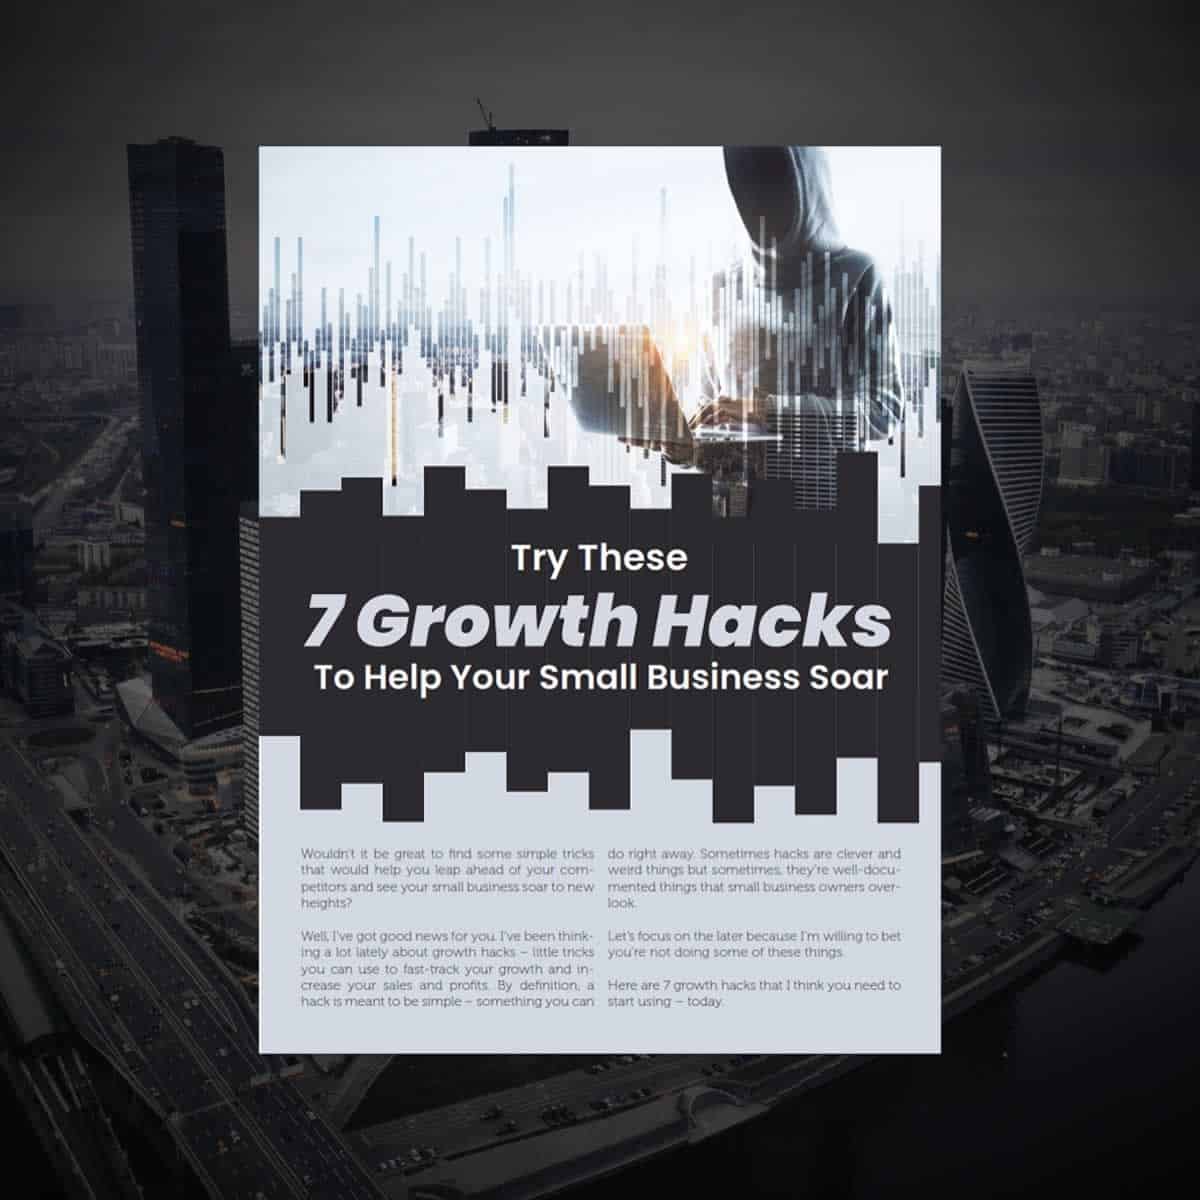 7 Growth Hacks to Help Your Small Business Soar